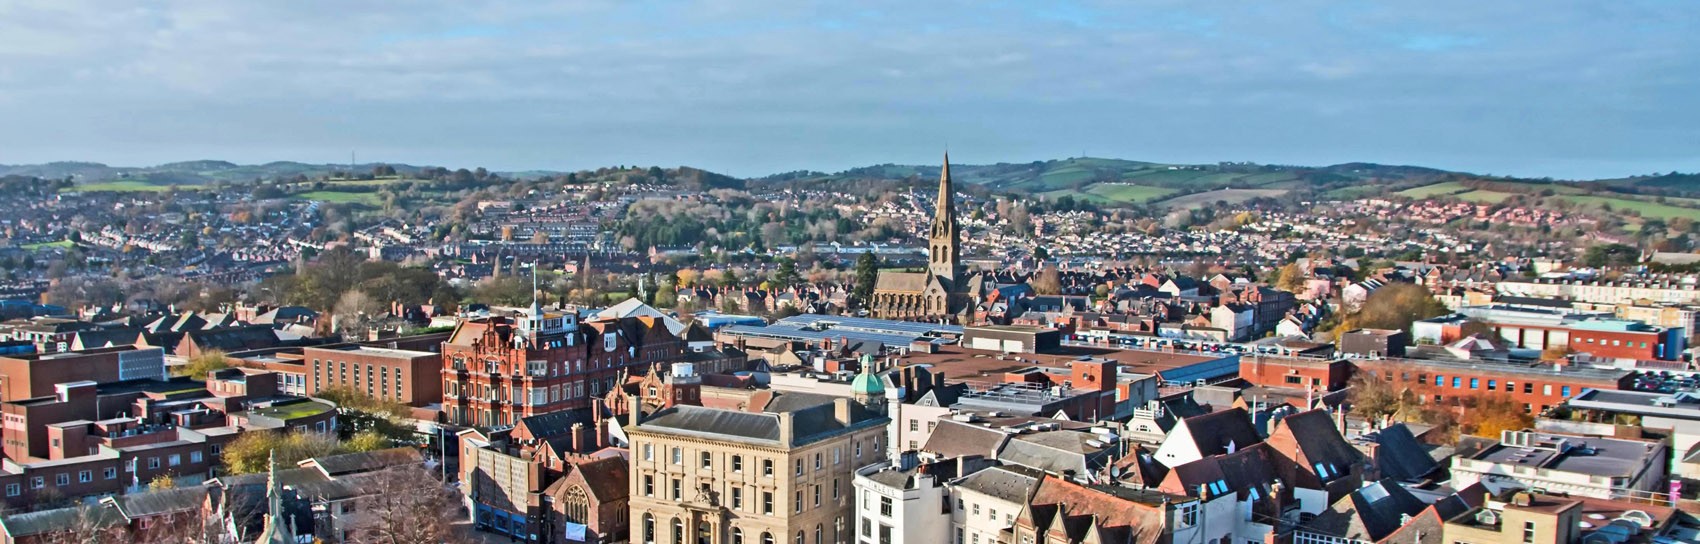 The city of Exeter in Devon. Photograph by ALEX GRAEME